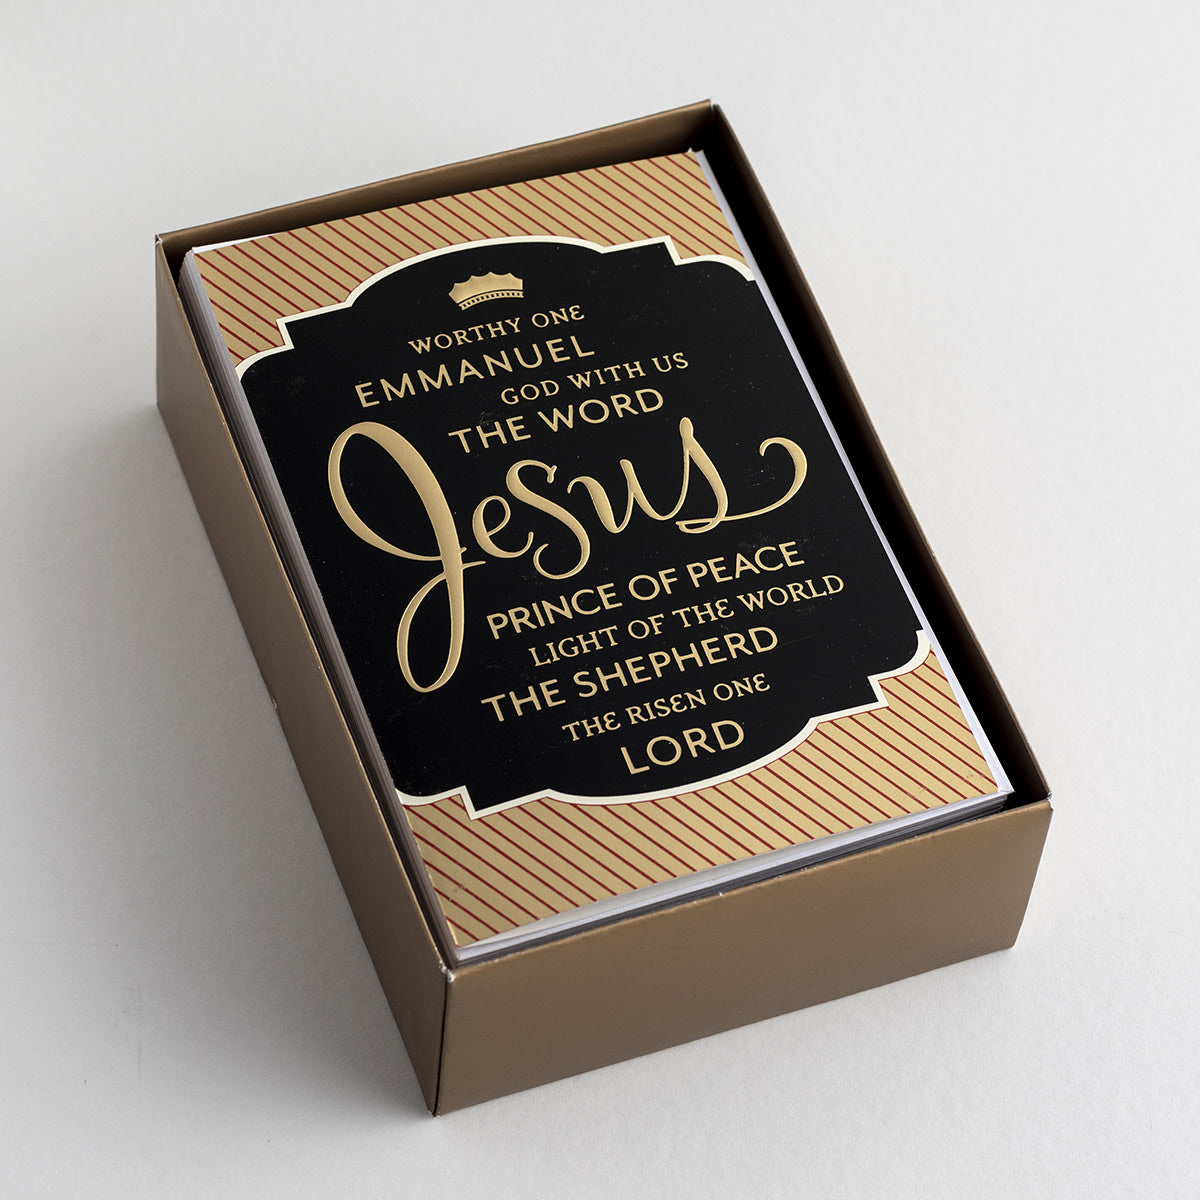 Christmas Cards - Names of Jesus (50 cards) - The Christian Gift Company